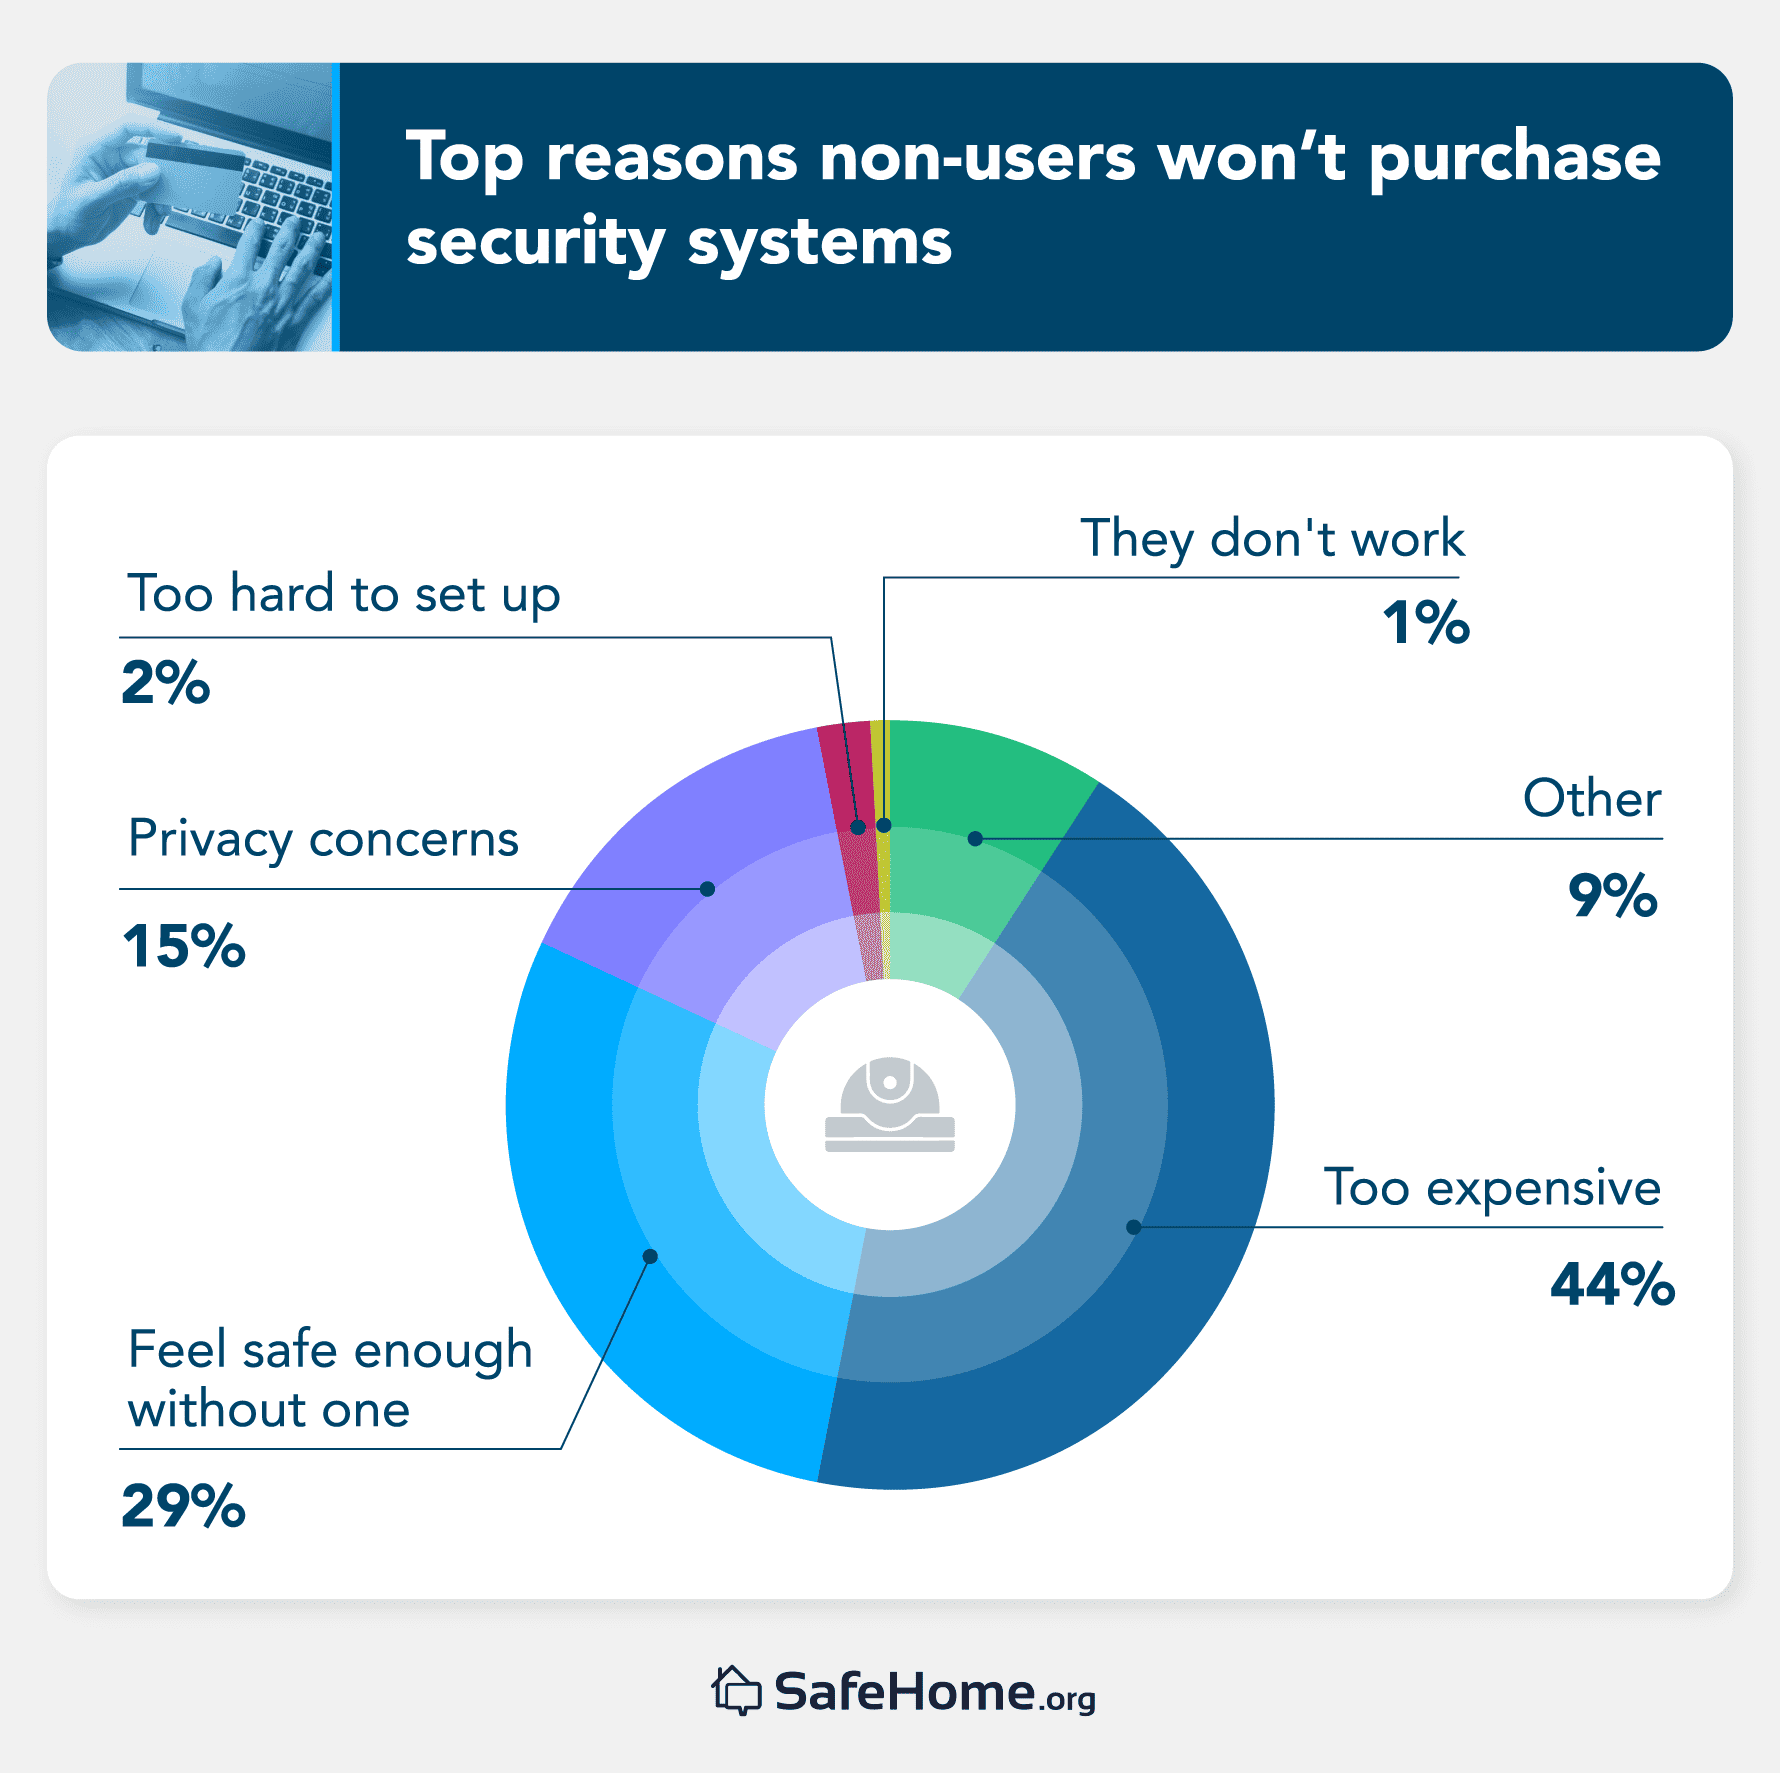 Top reasons non-users won't purchase security systems